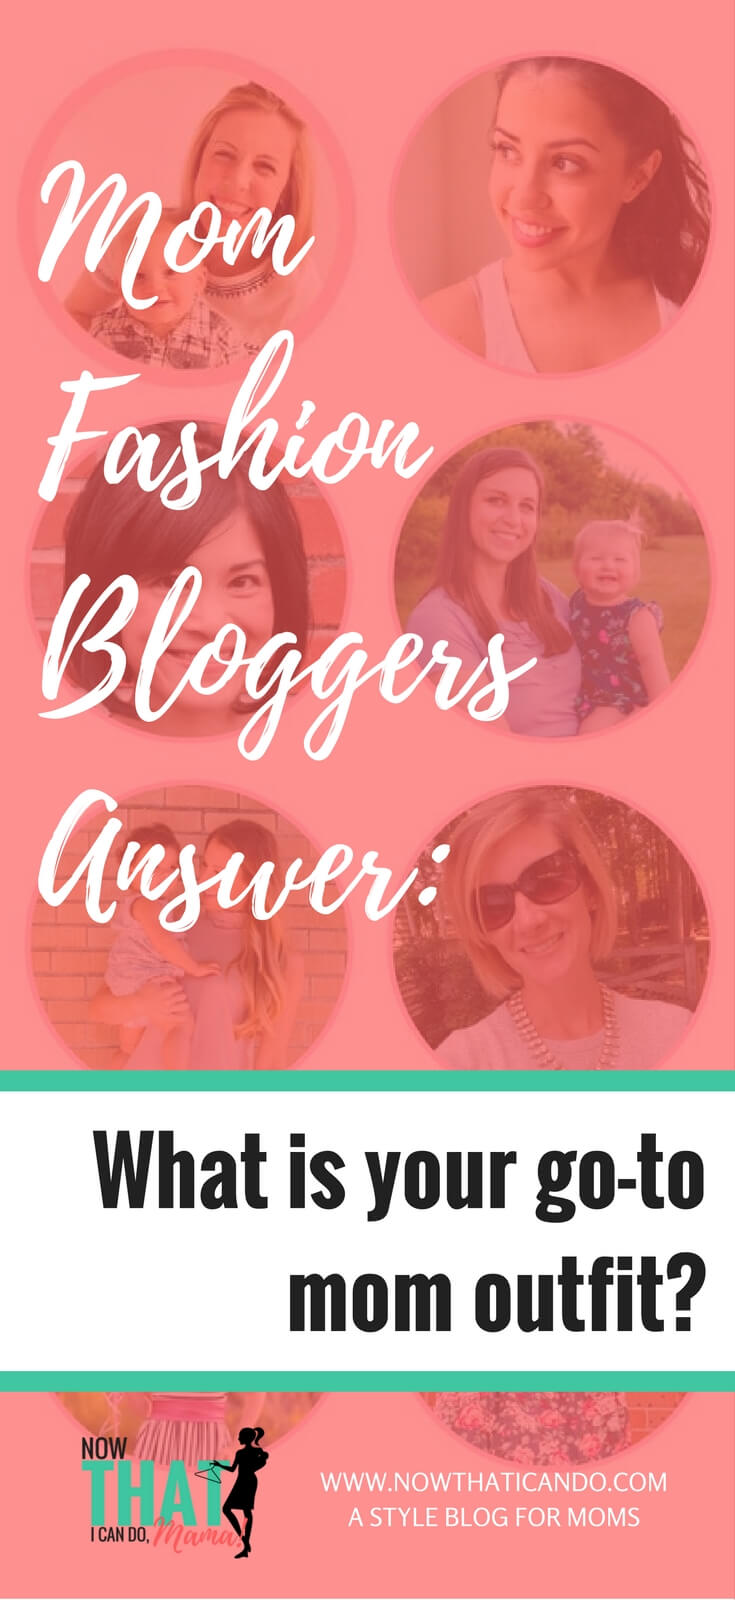 Want some ideas for easy but chic mom outfits for the daily grind? Check out what these 12 fashion bloggers default to for an effortless and comfortable look.